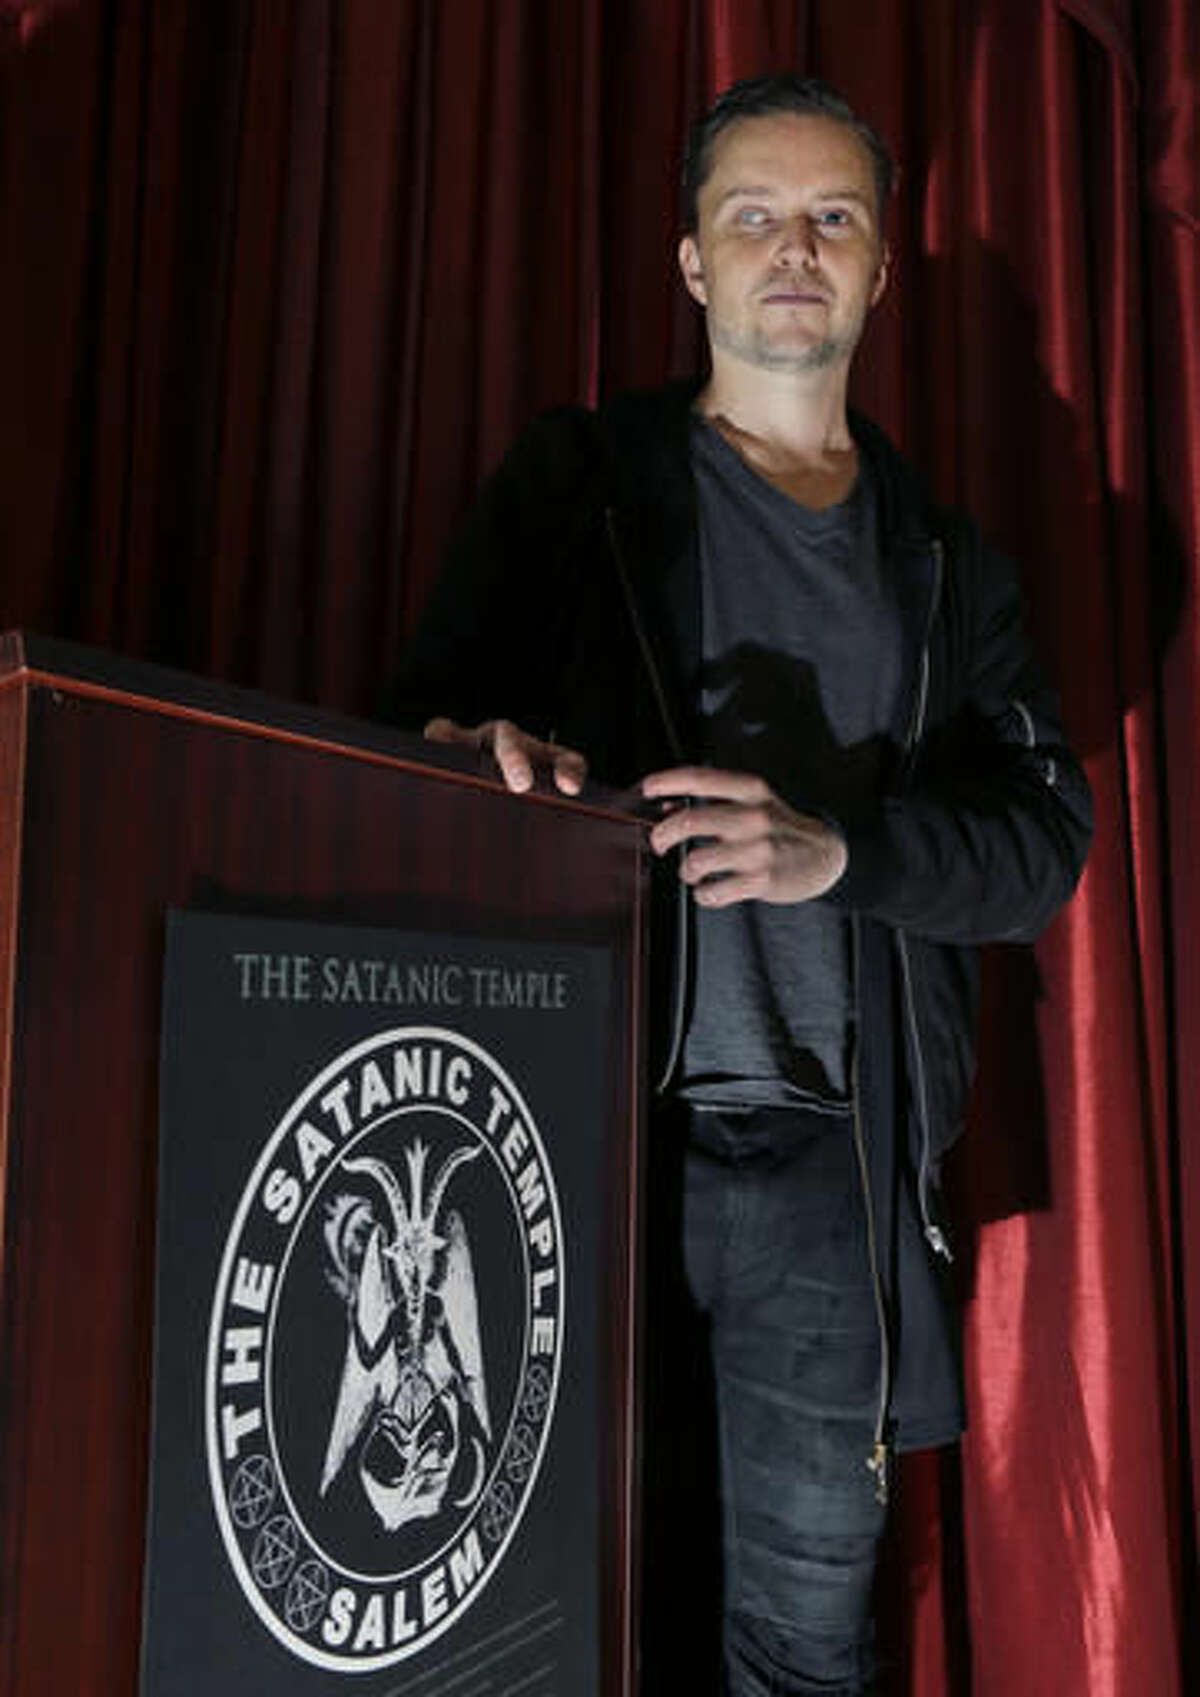 In this Oct. 24, 2016 photo, Lucien Greaves stands inside the recently opened international headquarters of the Satanic Temple in Salem, Mass. The Satanic Temple is waging religious battles along a variety of fronts nationwide, and its co-founder says it's just getting started. Greaves says the temple hopes to ensure Satanists "have a place in the world" and that "evangelical theocrats" don't monopolize the religious freedom debate. (AP Photo/Elise Amendola)